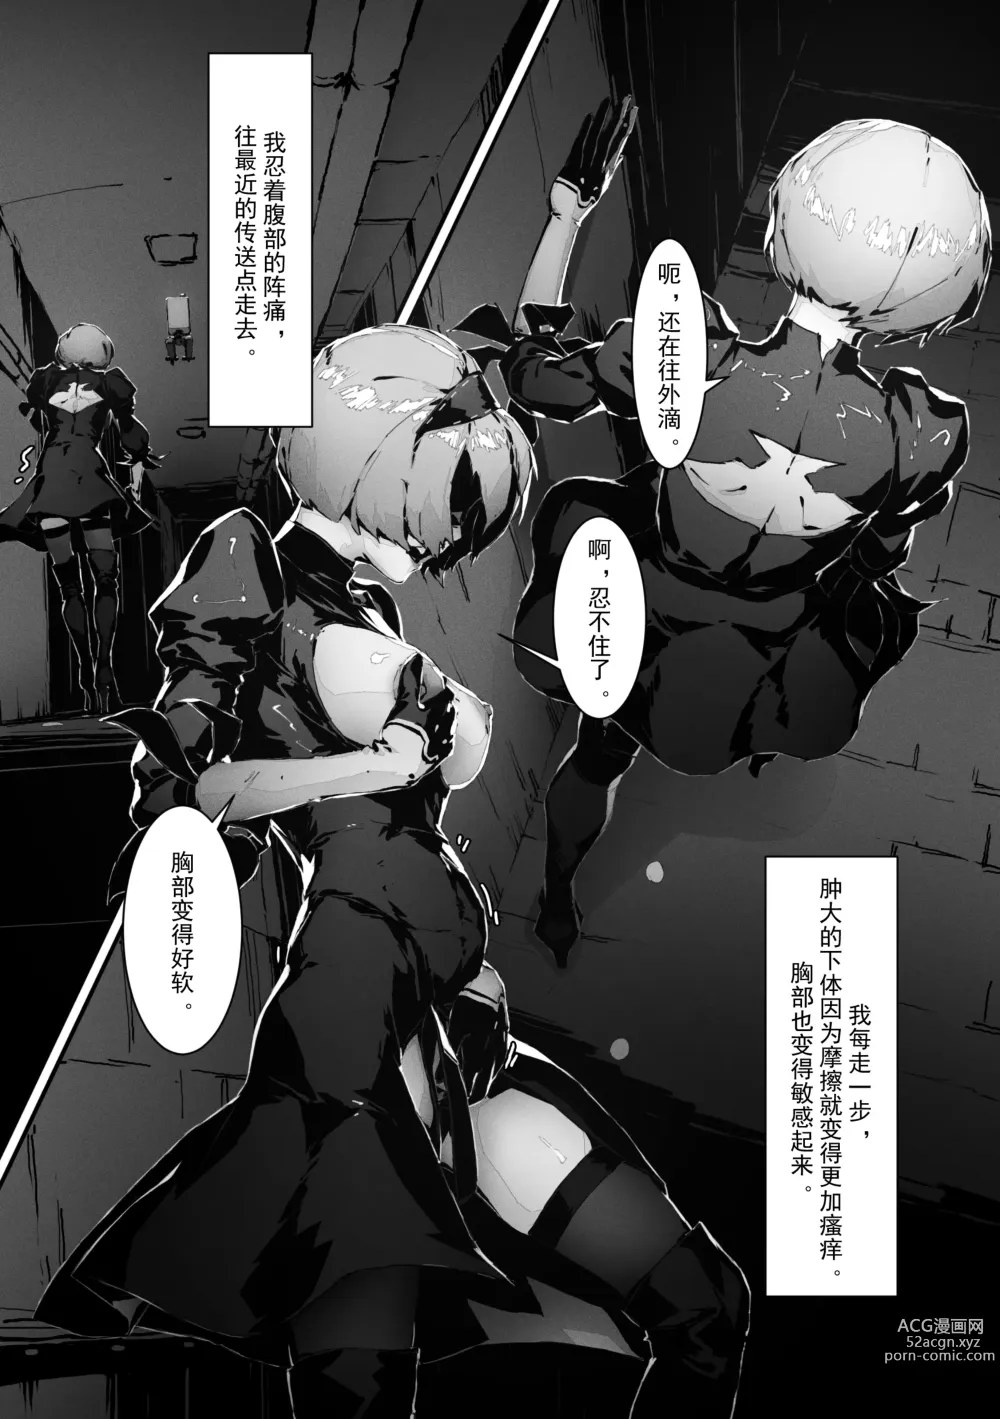 Page 26 of doujinshi 2B In Trouble Part 1-6